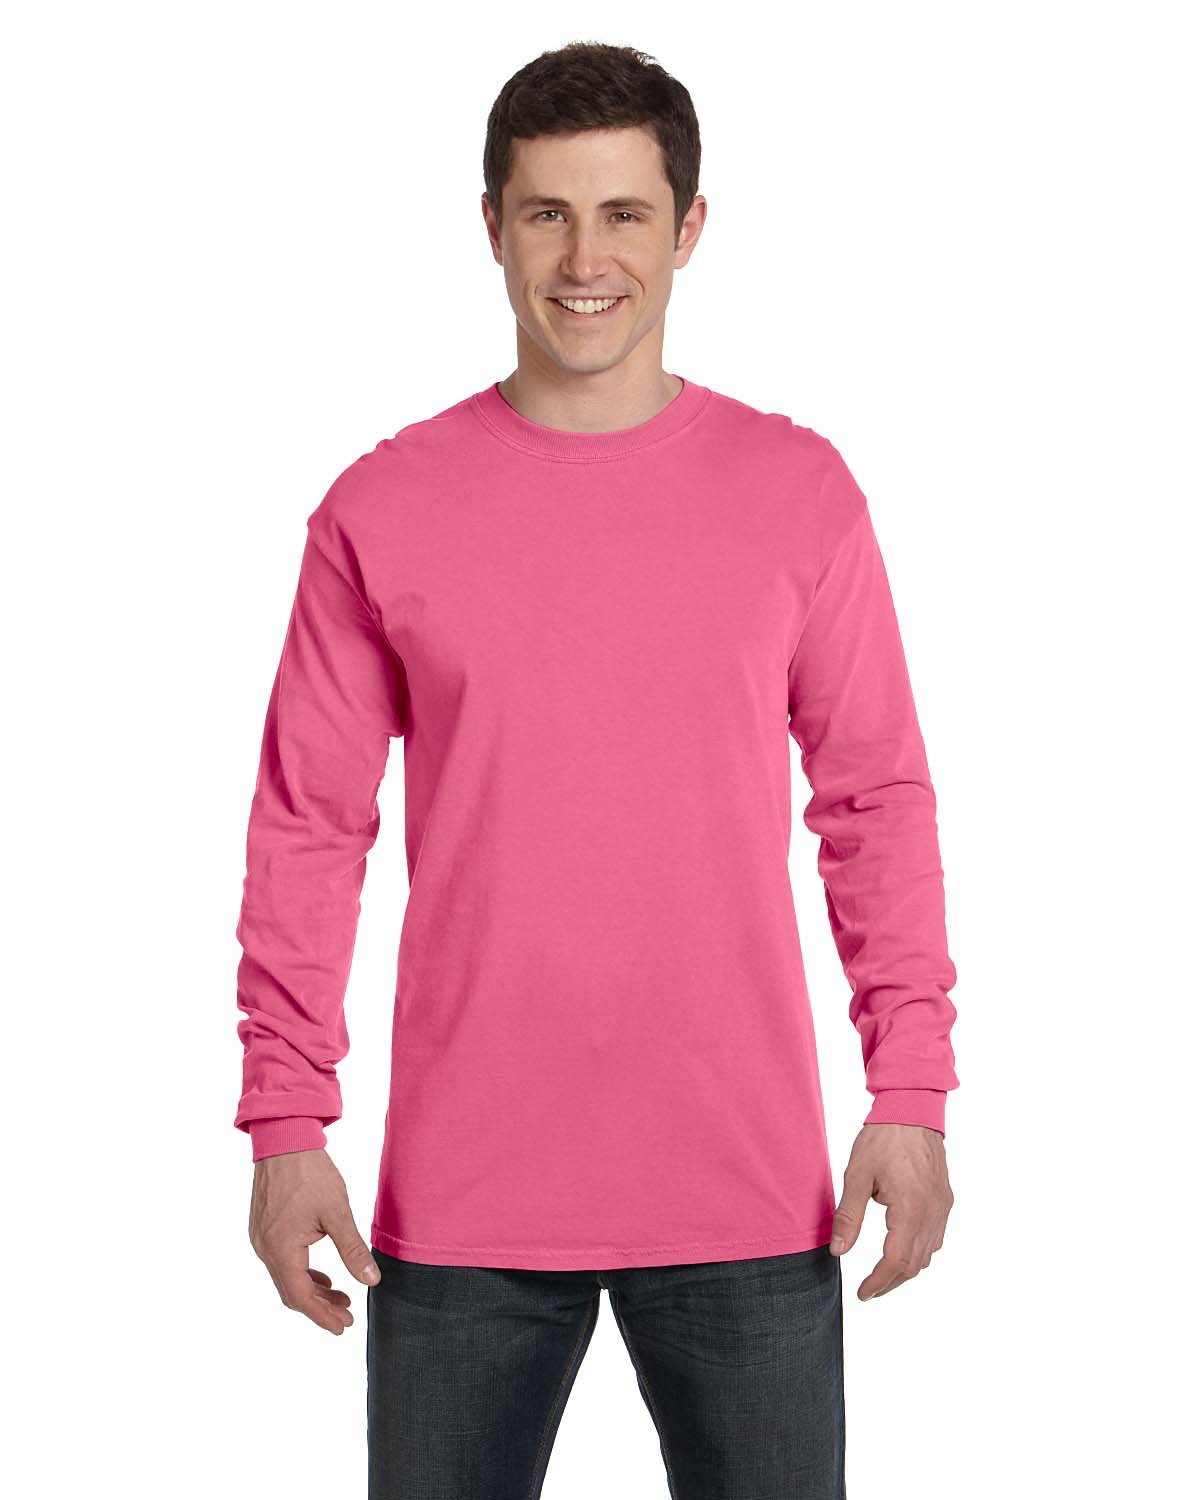 Comfort Colors Adult Heavyweight RS Long-Sleeve T-Shirt crunchberry 